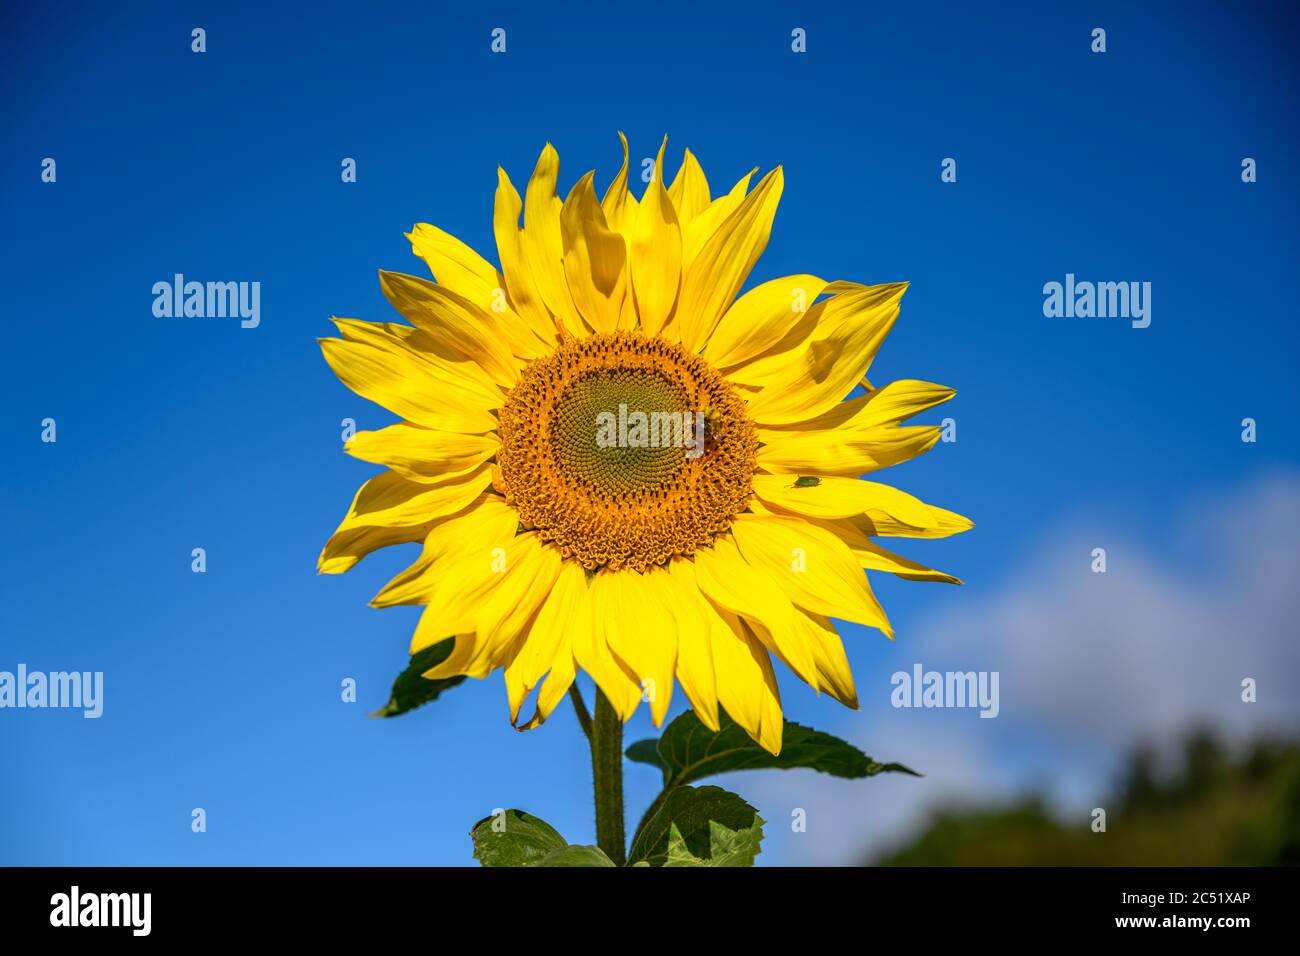 Sunflower against a bright blue sky with bumble bee and shield beetle Stock Photo